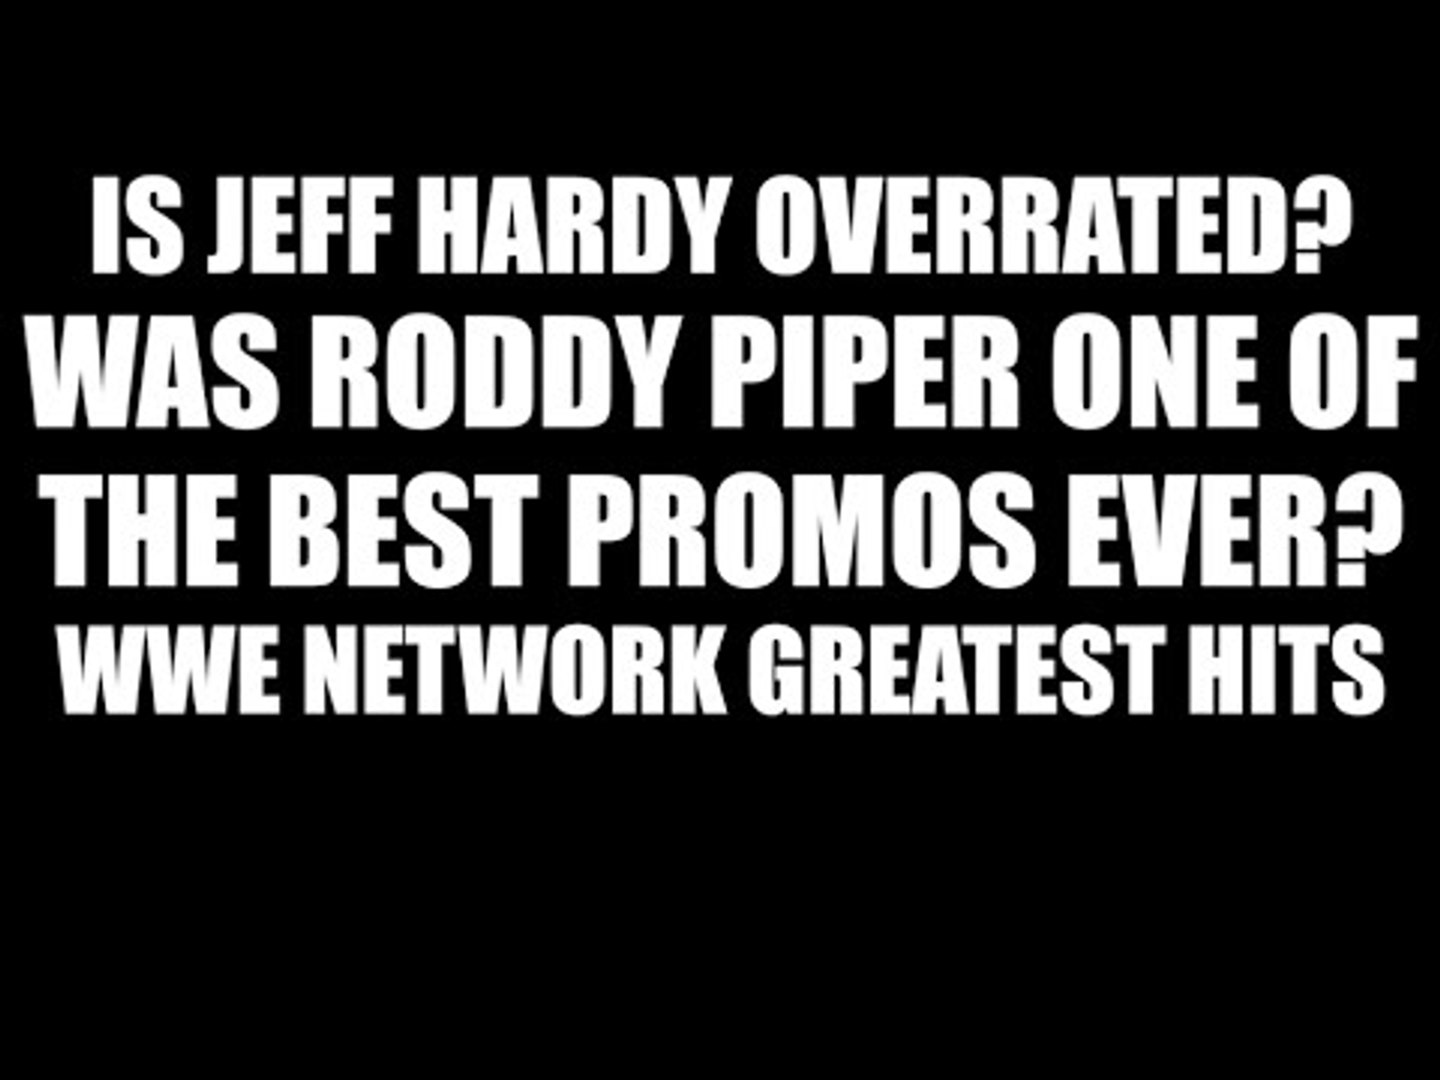 Is Jeff Hardy Overrated? Was Rowdy Roddy Piper one of the Best Promos Ever?